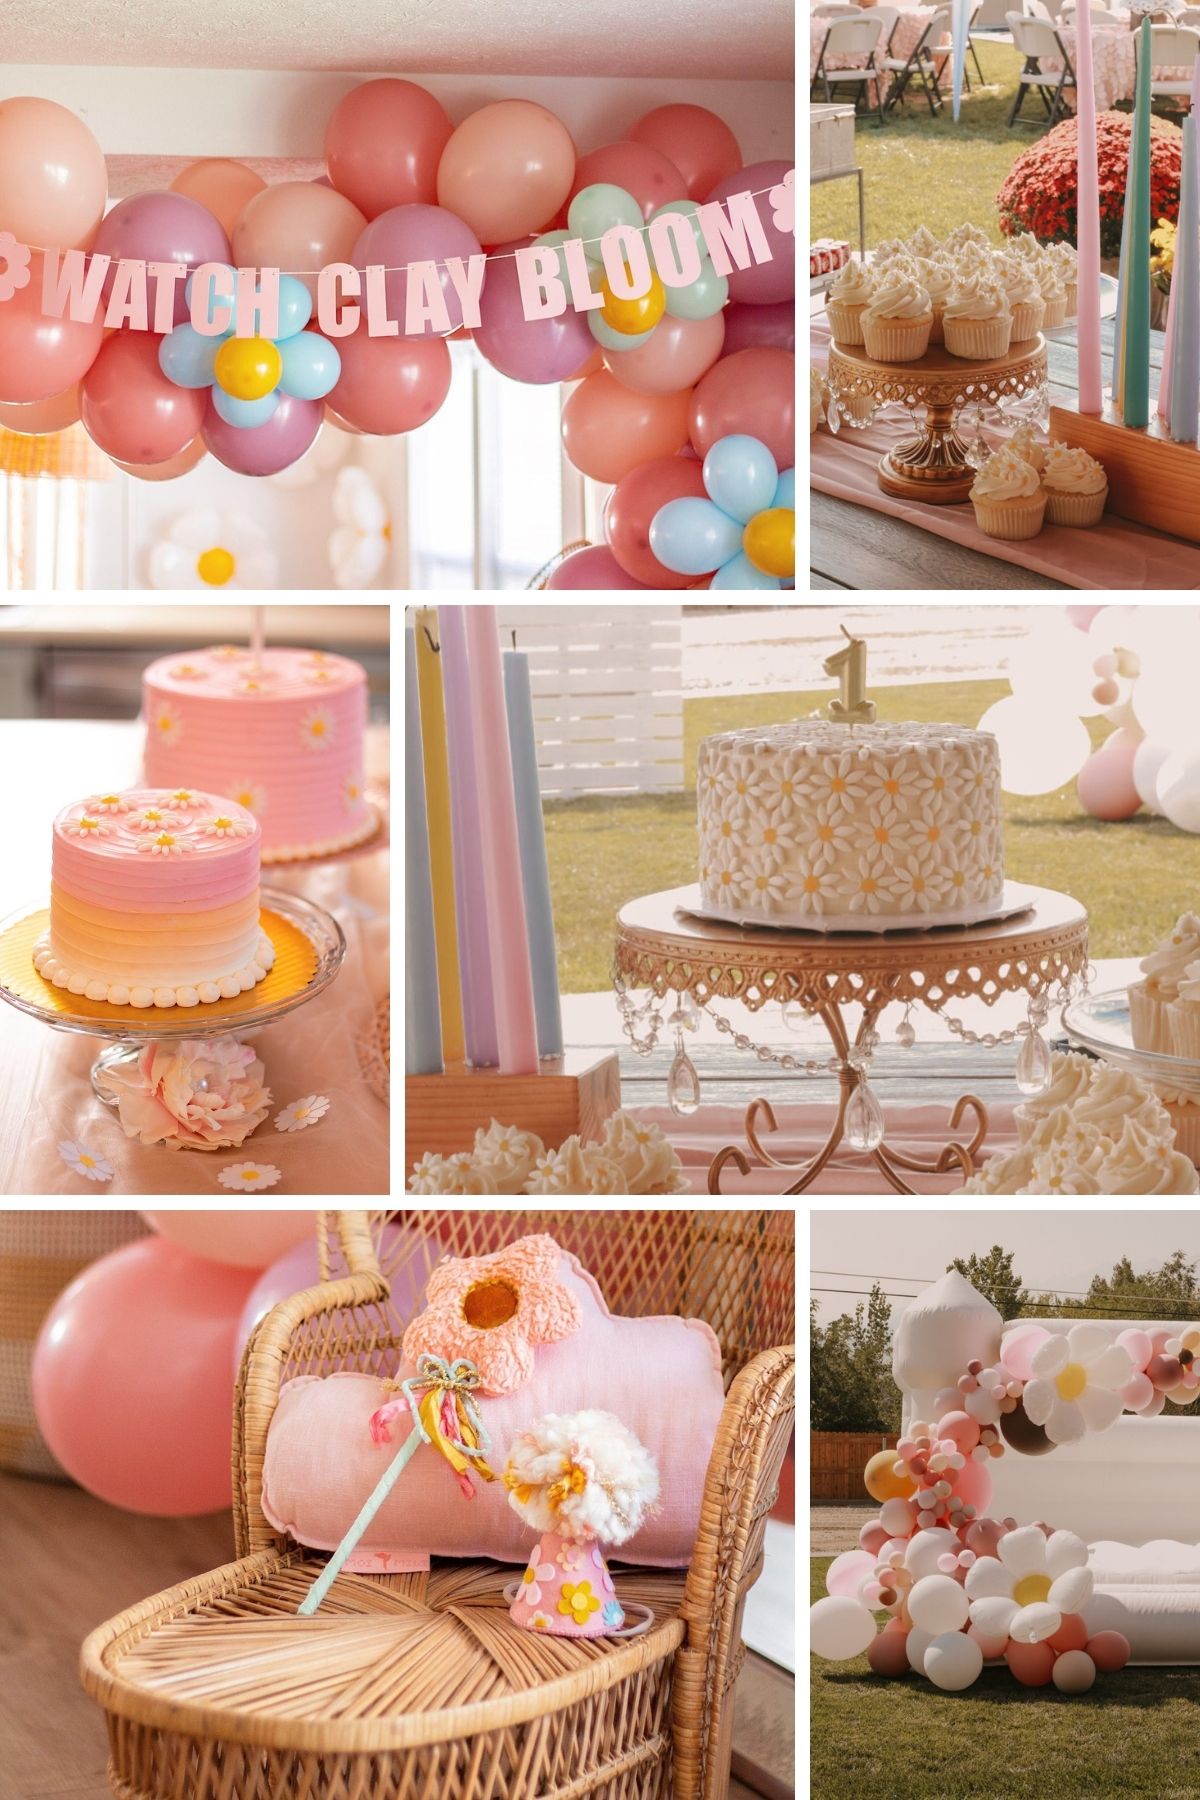 Photo collage for daisy party theme including balloons, cakes, and party favors.